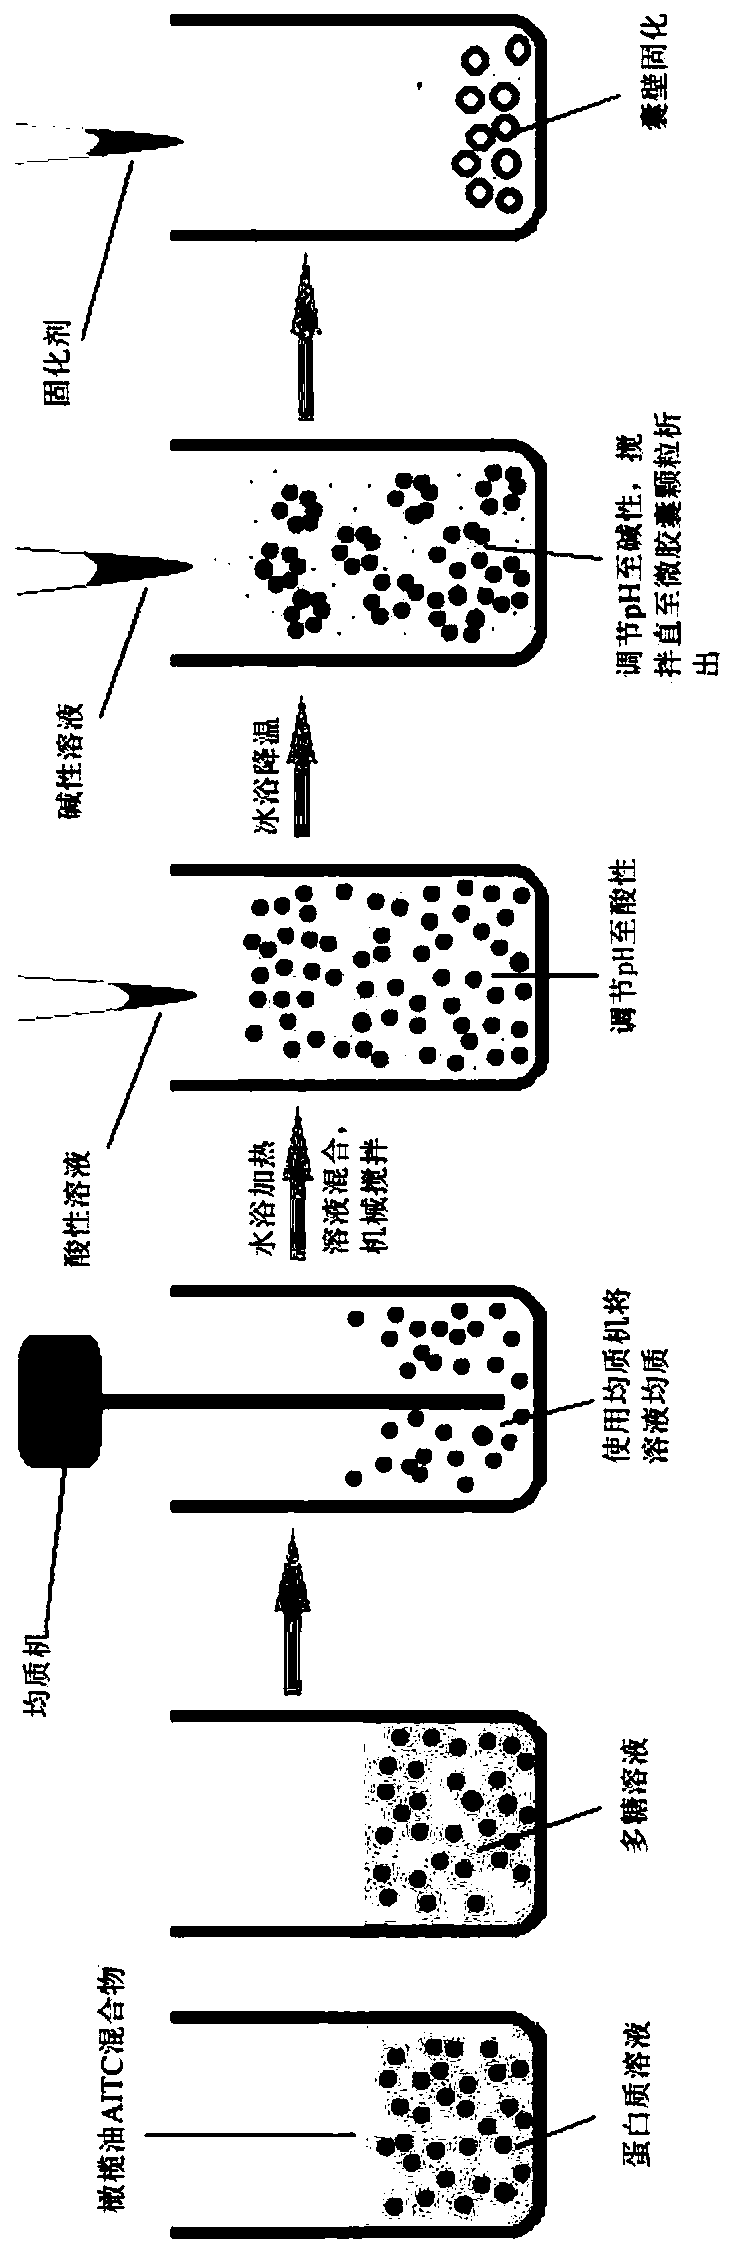 Preparation method and application of allyl isothiocyanate microcapsule slow-release bag